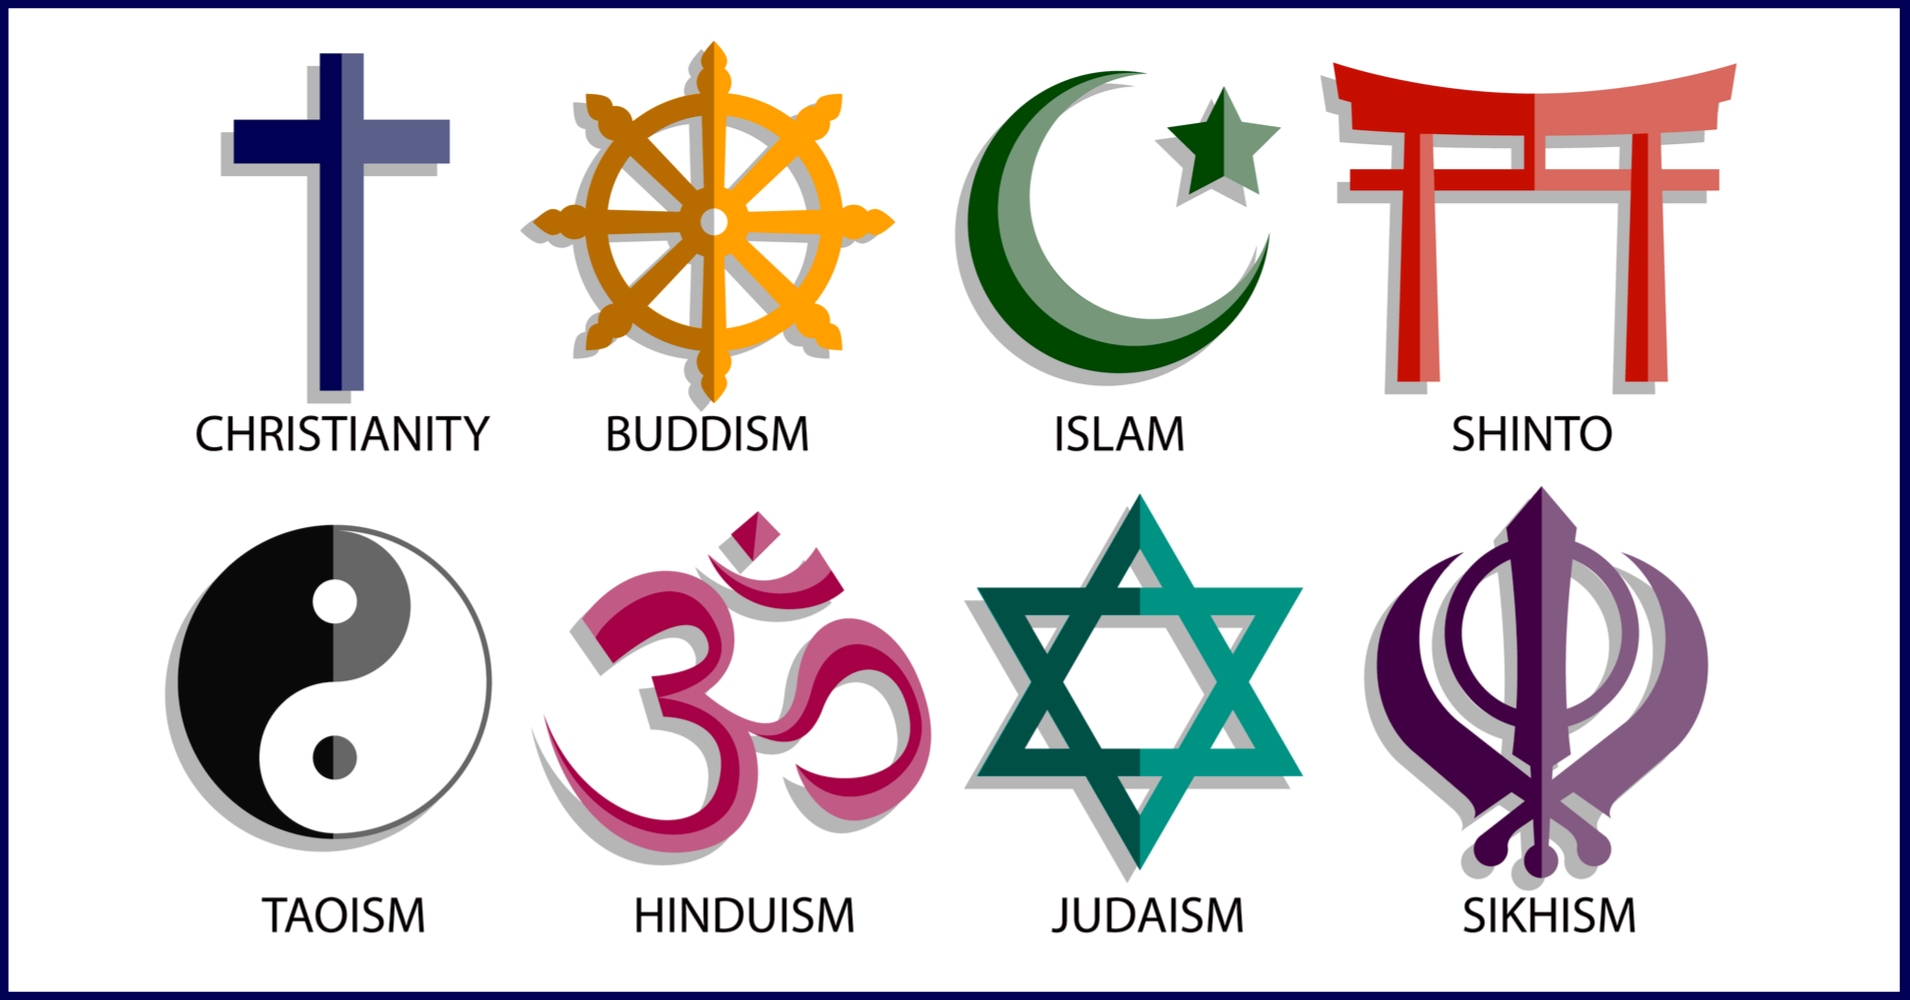 Religions Of The World